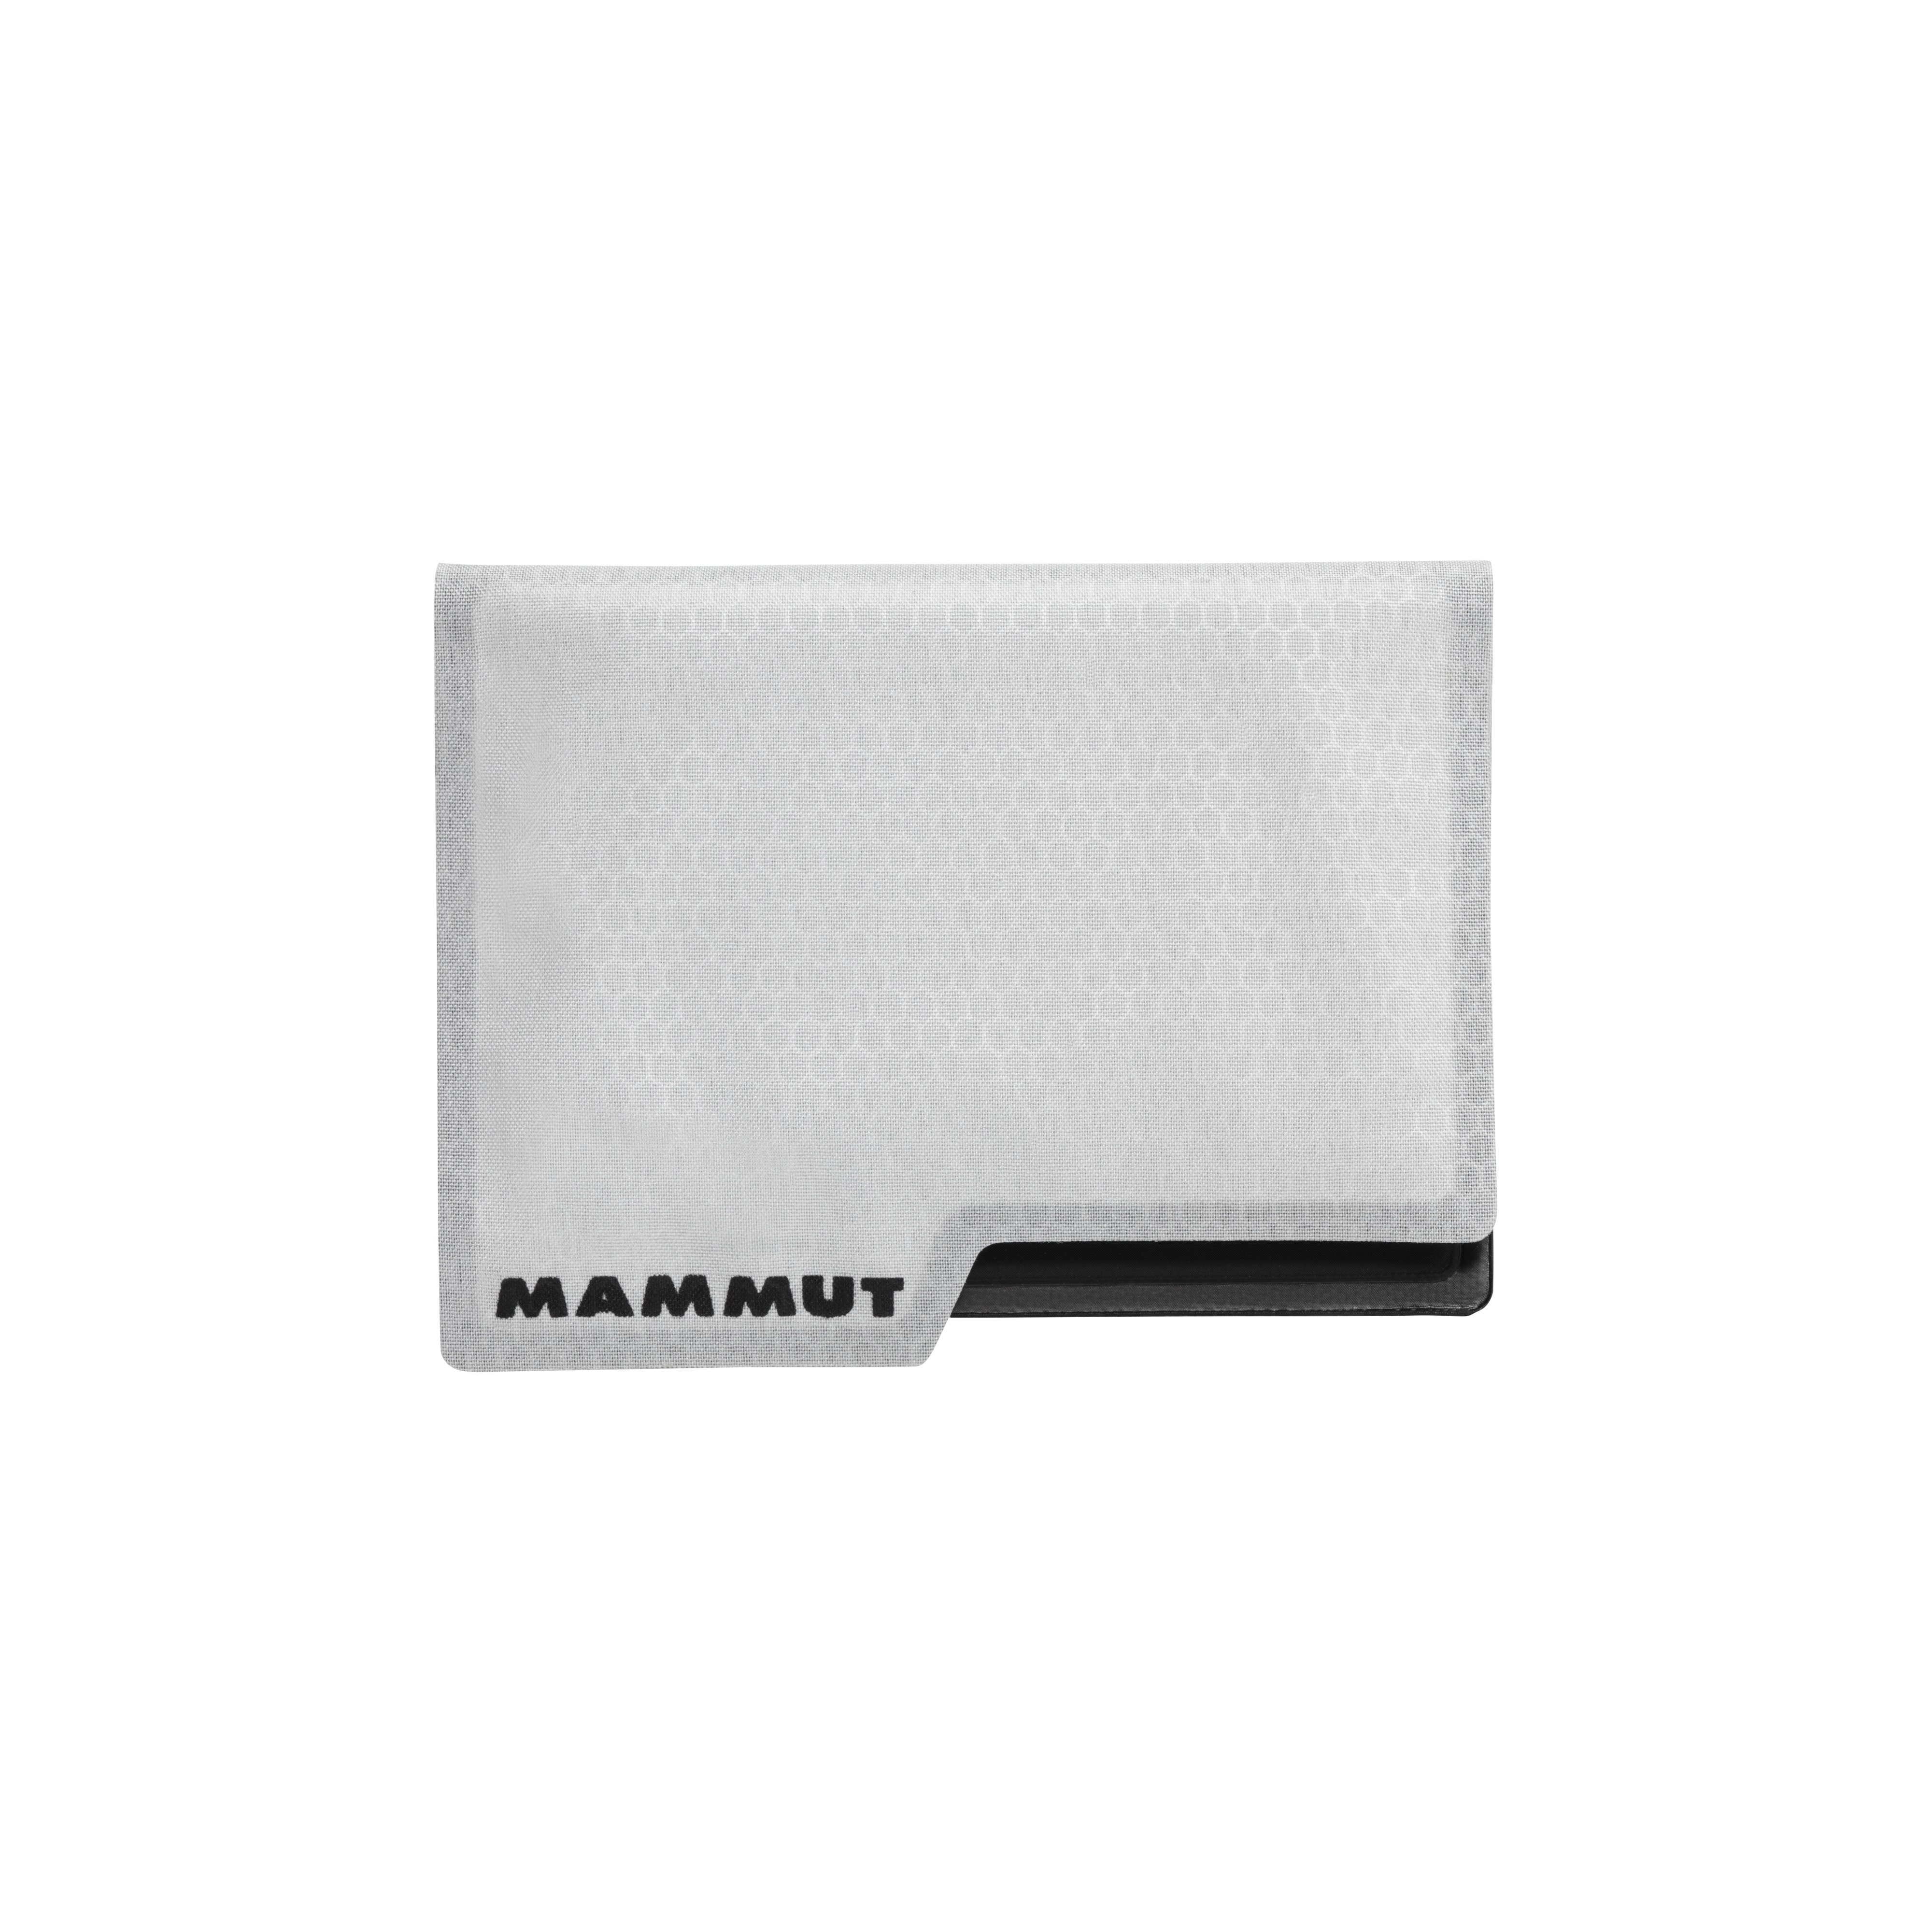 Smart Wallet Ultralight - white, one size product image